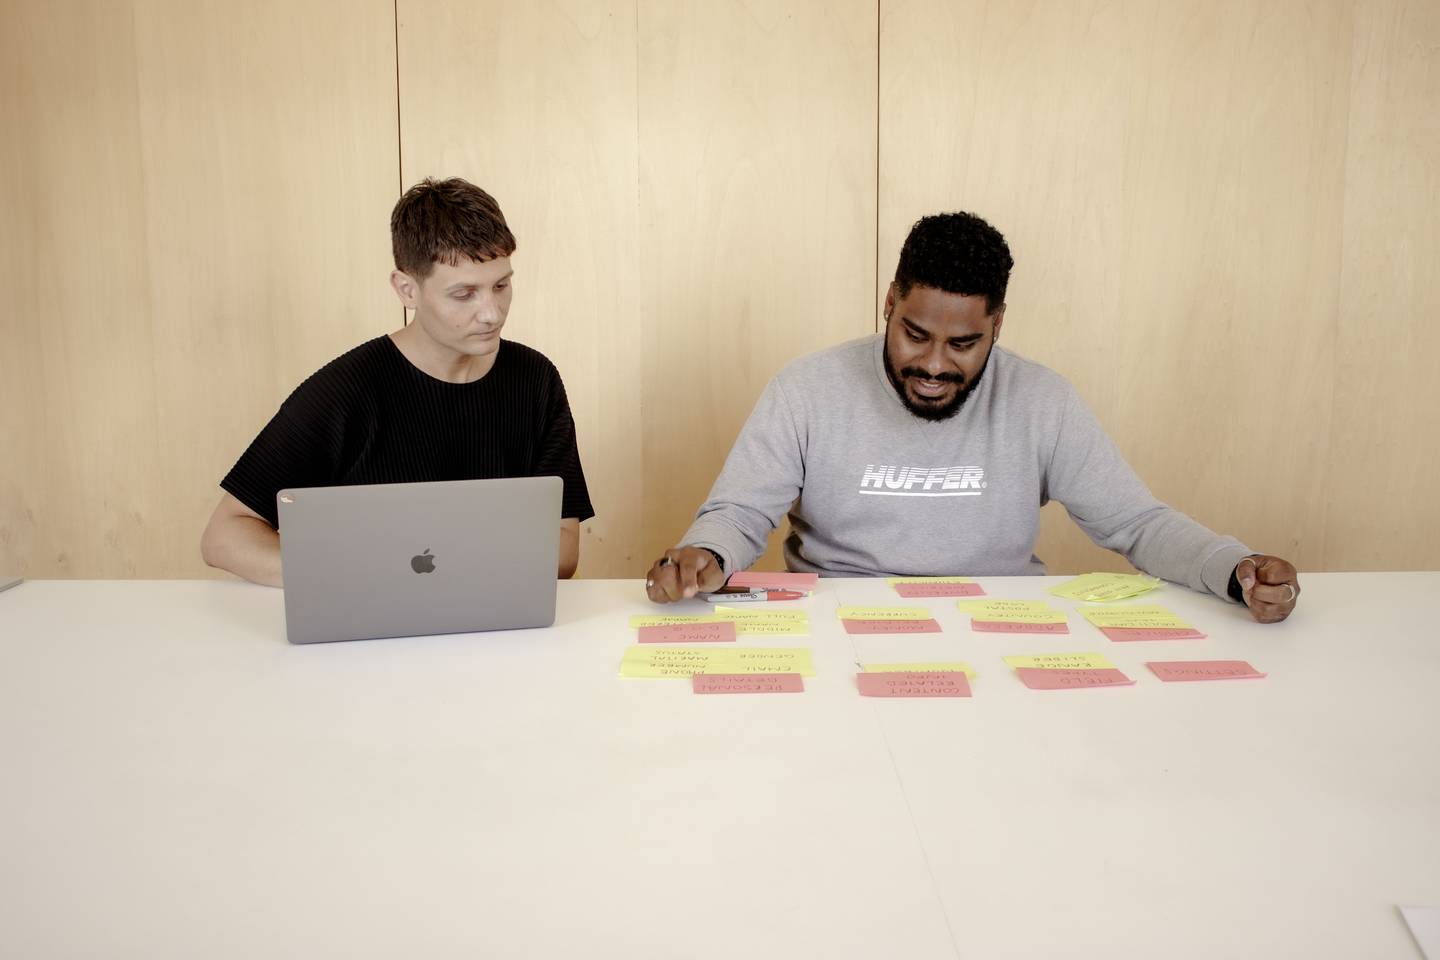 Two men sitting at a table sorting post it notes